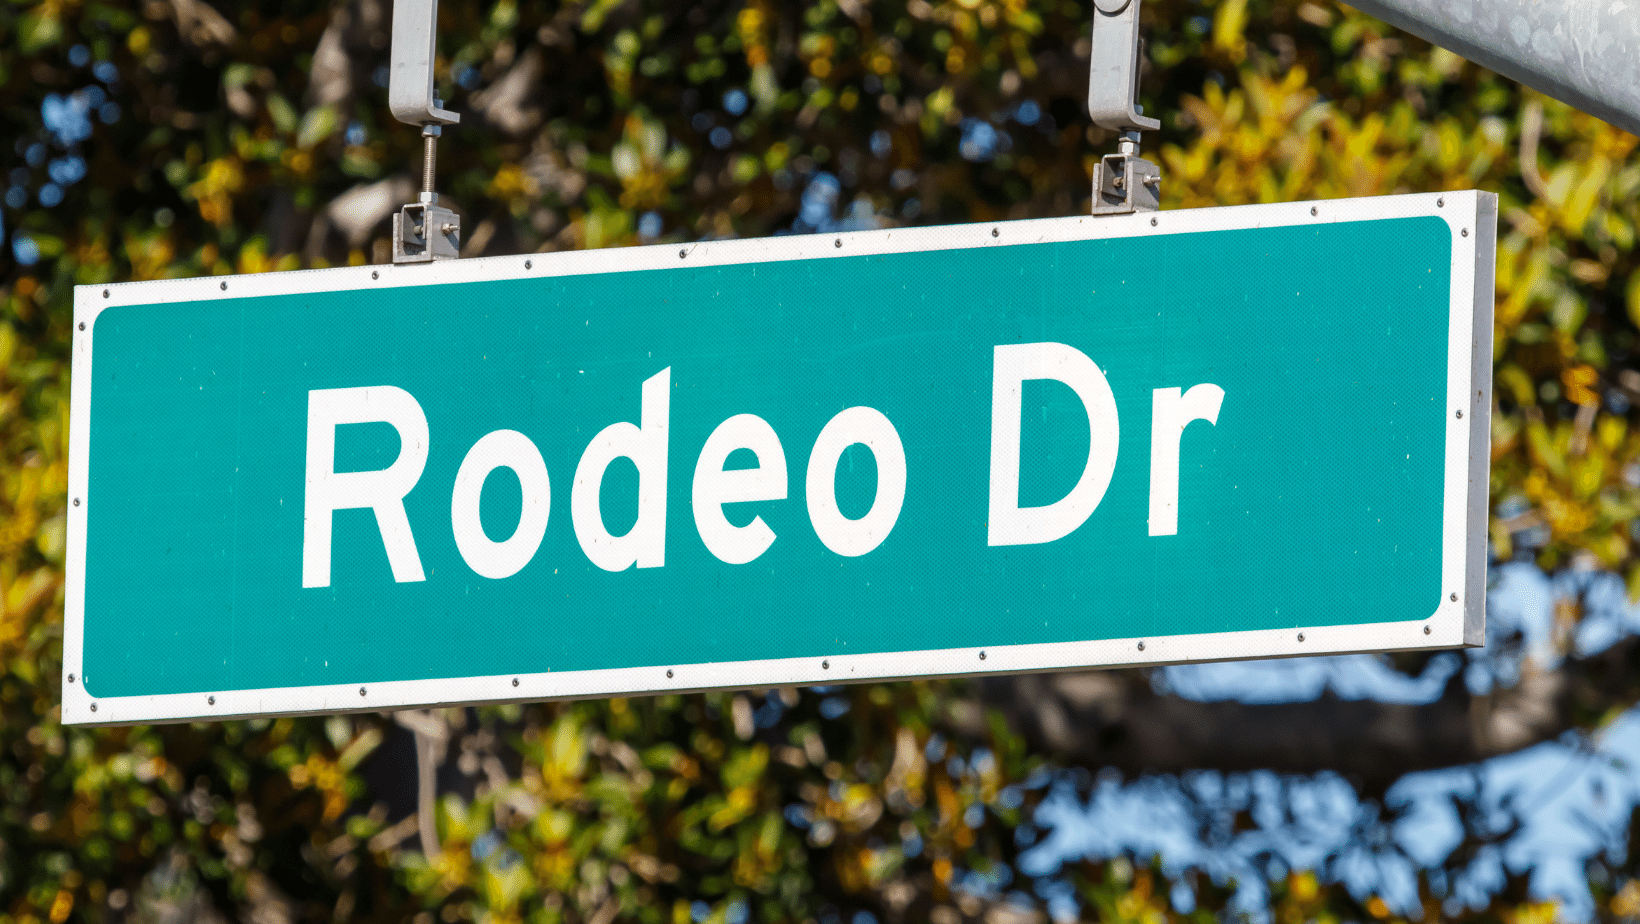 A street sign with the word rodeo dr on it